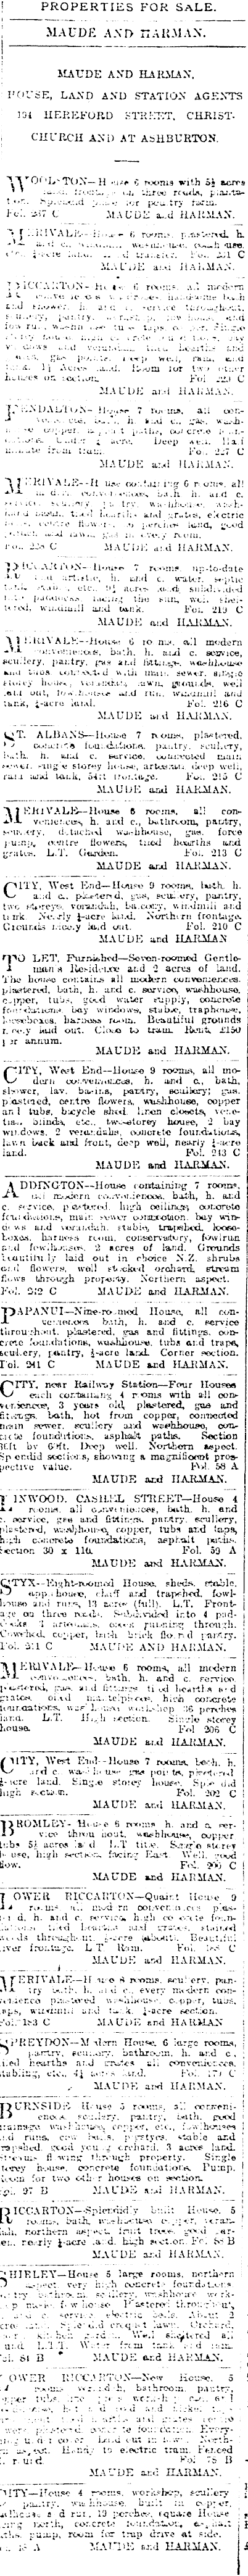 Papers Past Newspapers Press 16 March 1908 Page 11 Advertisements Column 3